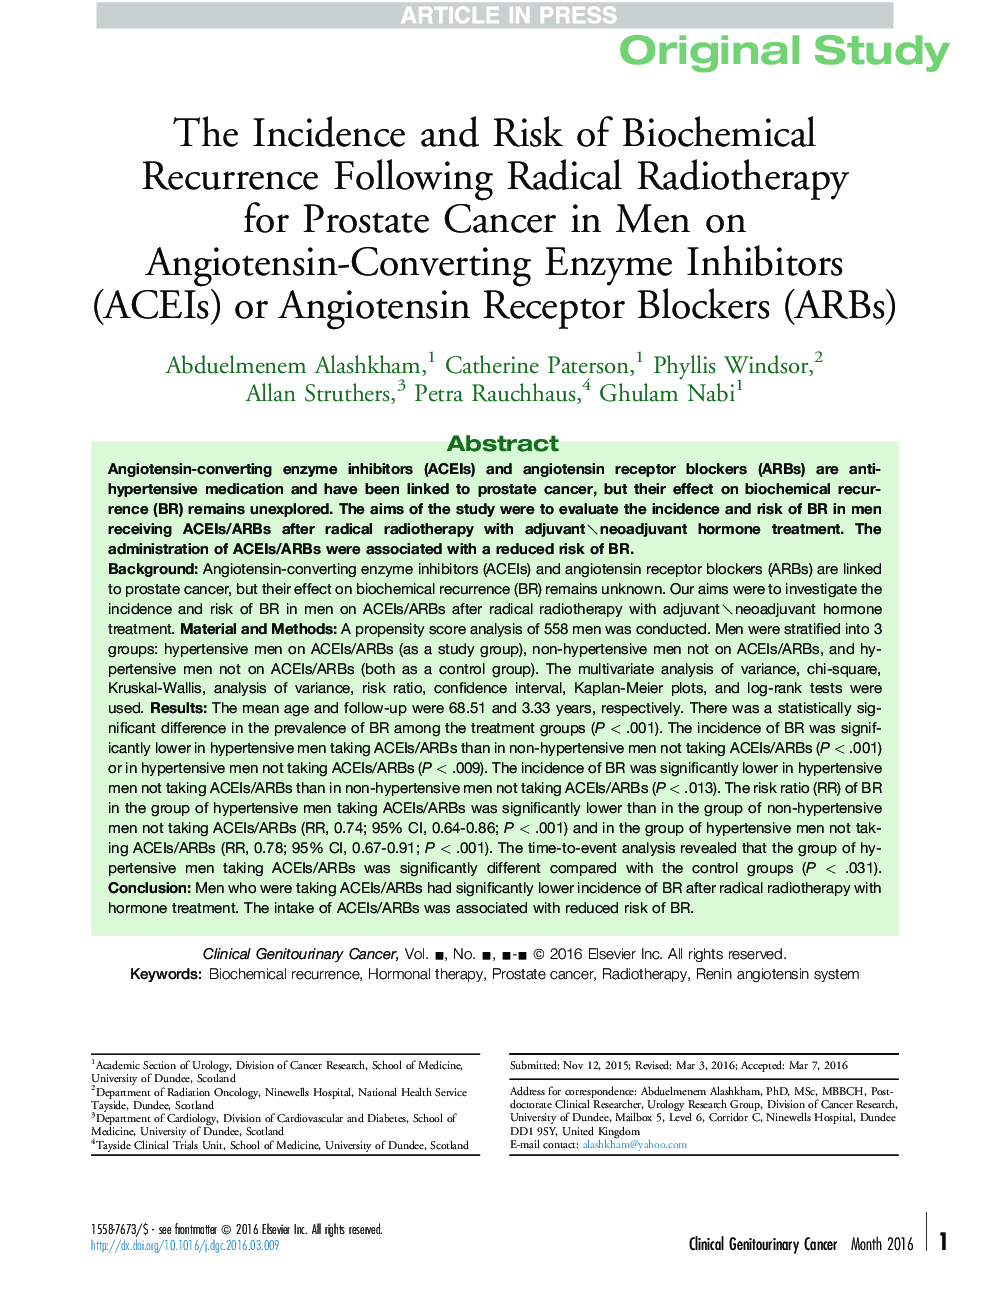 The Incidence and Risk of Biochemical Recurrence Following Radical Radiotherapy for Prostate Cancer in Men on Angiotensin-Converting Enzyme Inhibitors (ACEIs) or Angiotensin Receptor Blockers (ARBs)